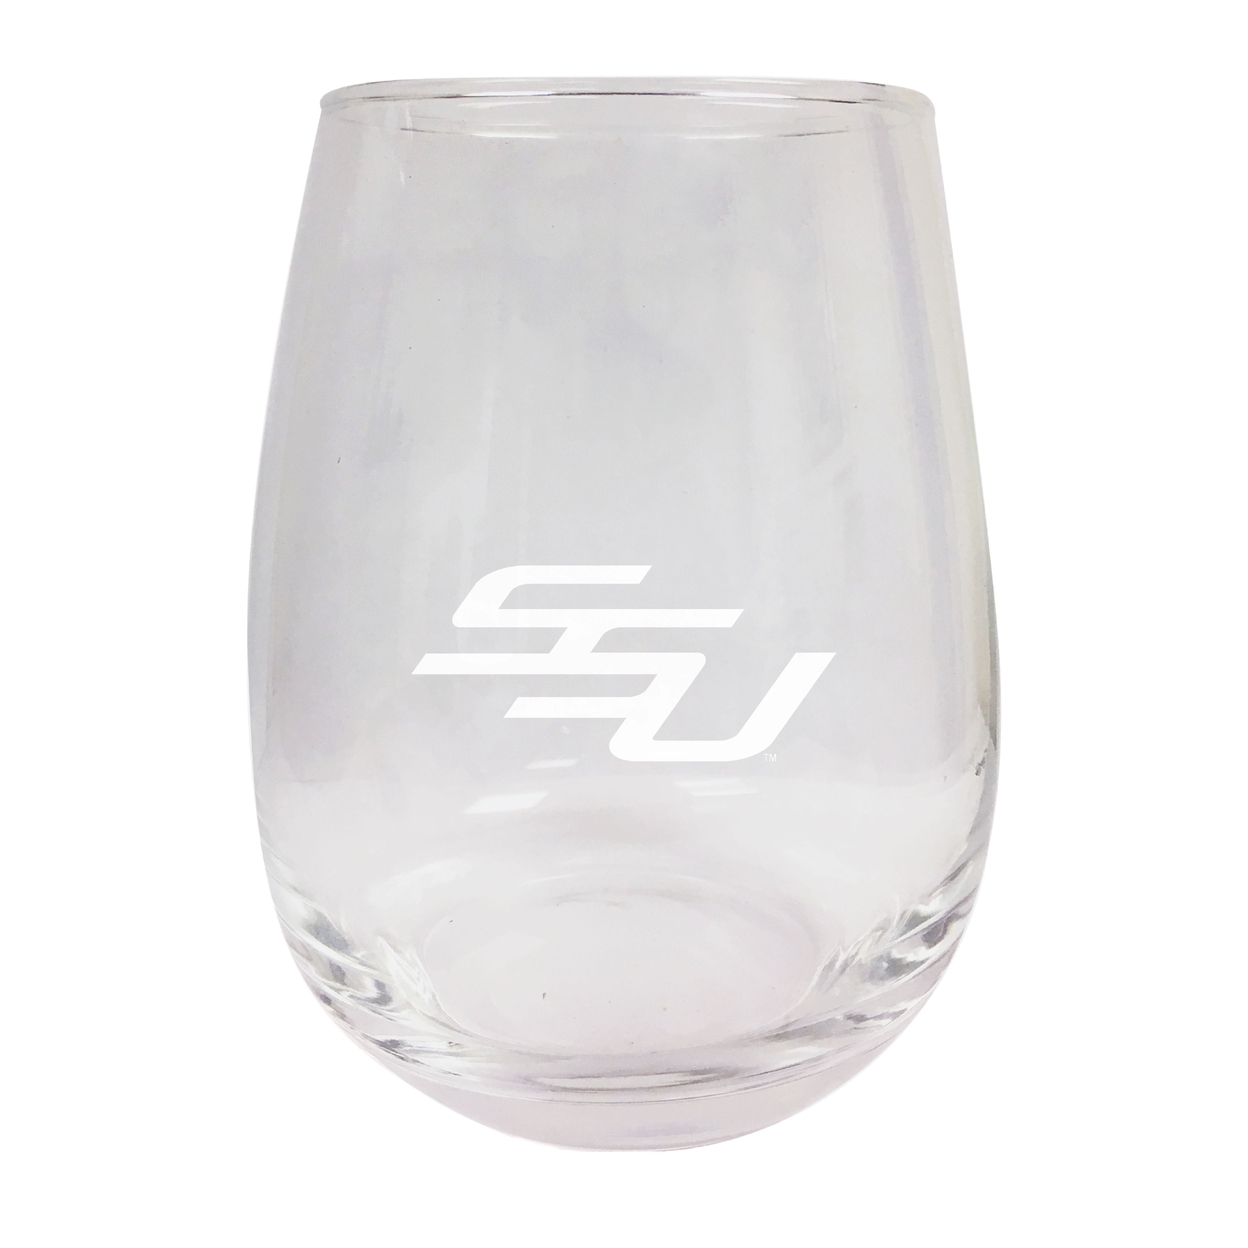 Savannah State University Etched Stemless Wine Glass